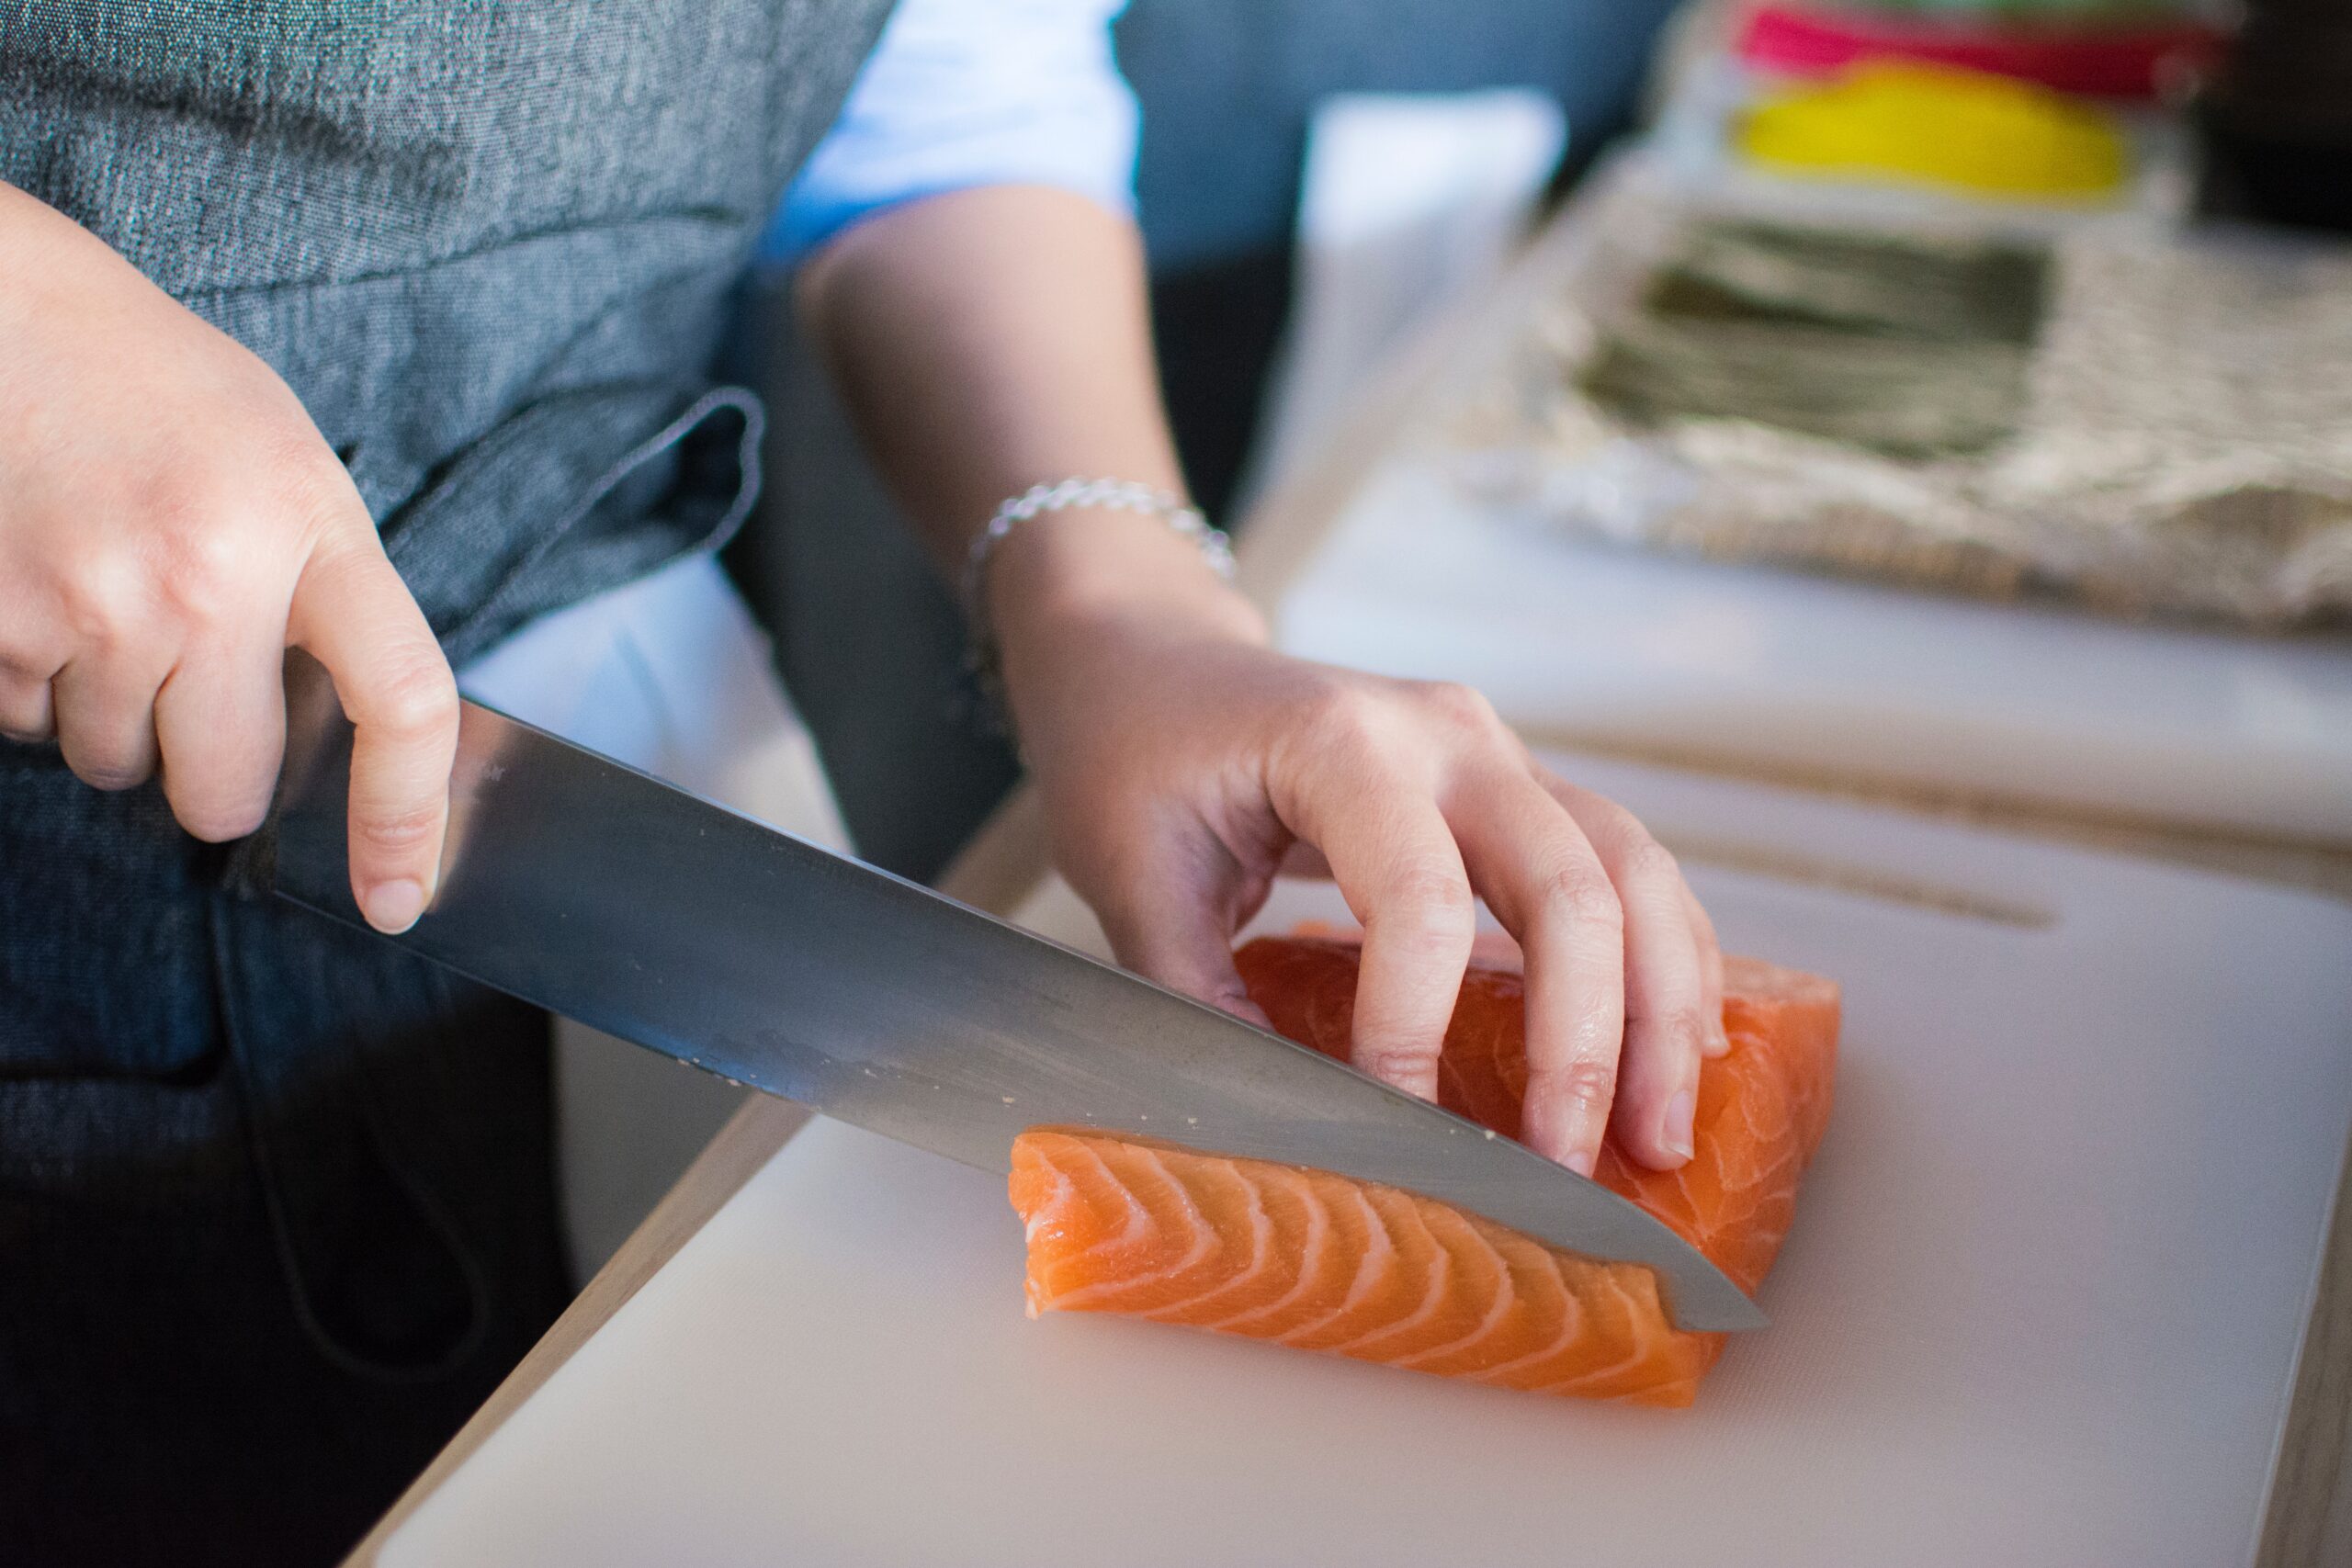 Do You Wash Salmon Before Cooking?